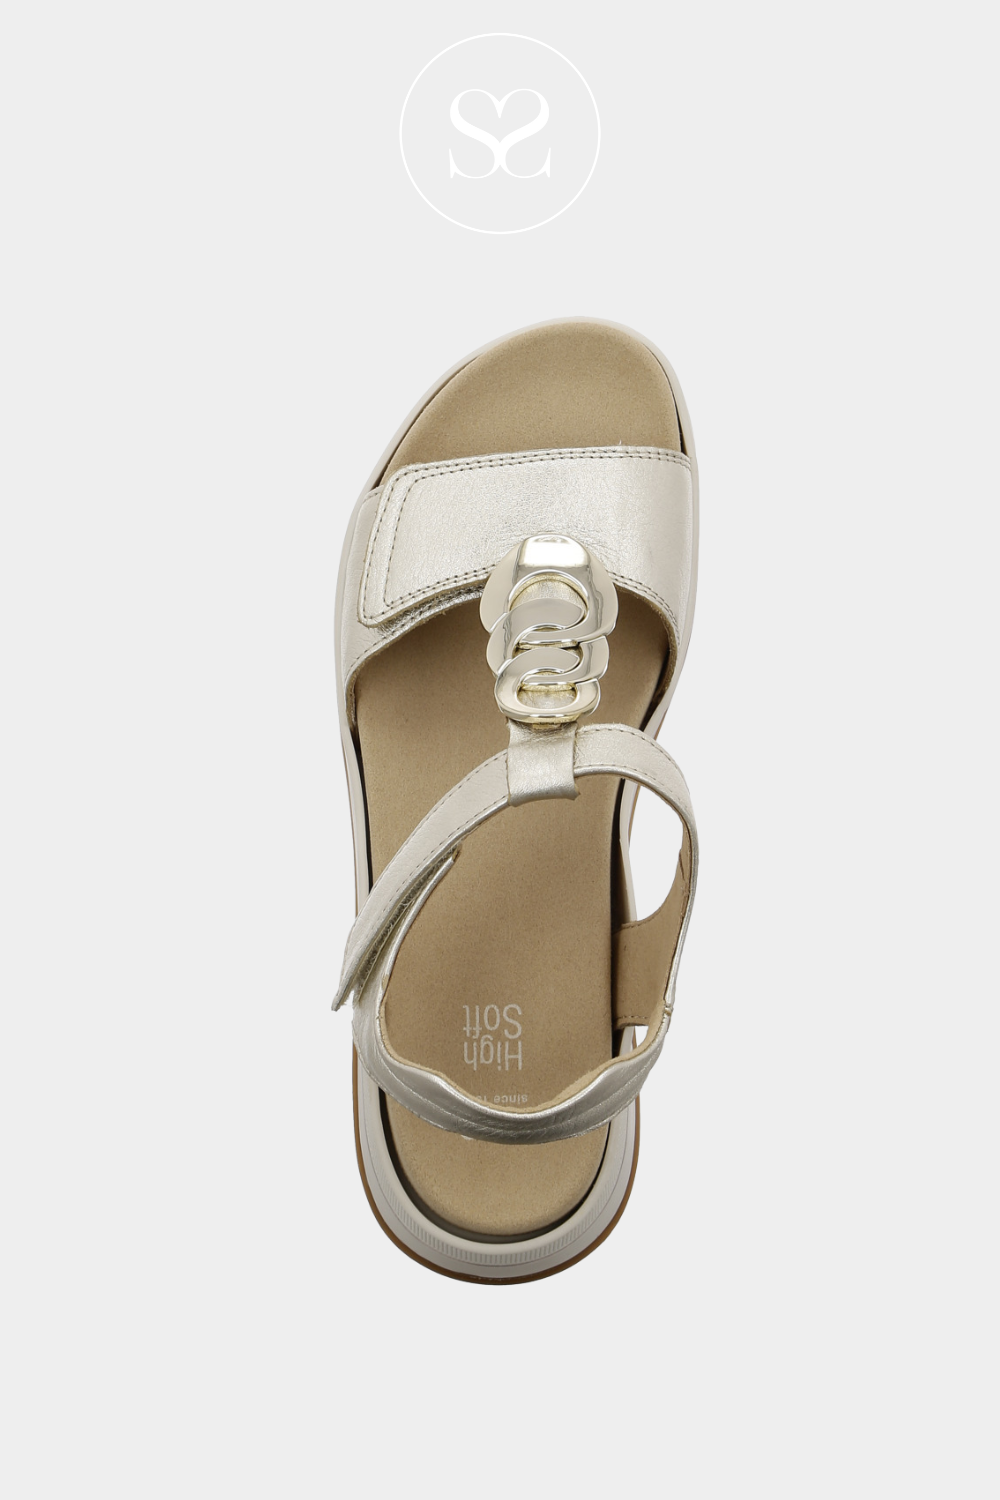 ARA 12-34826 GOLD LEATHER METALLIC WALKING LOW WEDGE SANDALS WITH TWO THICK VELCRO STRAPS AND GOLD CHAIN DETAIL